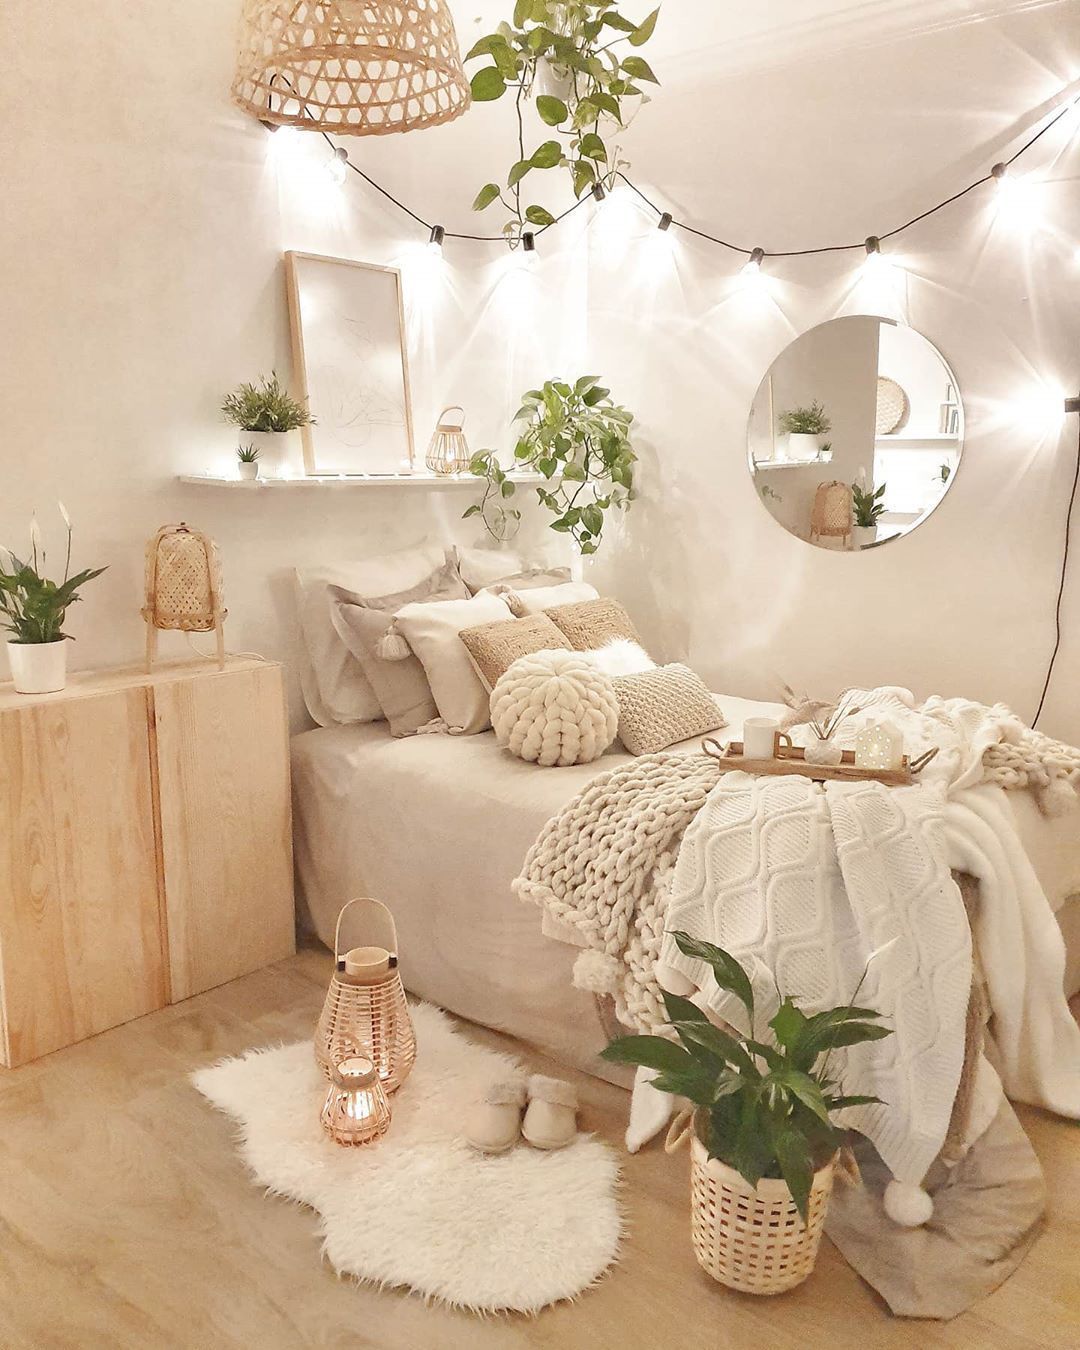 Creative Ways to Maximize Space in
Teenage Girls’ Small Rooms